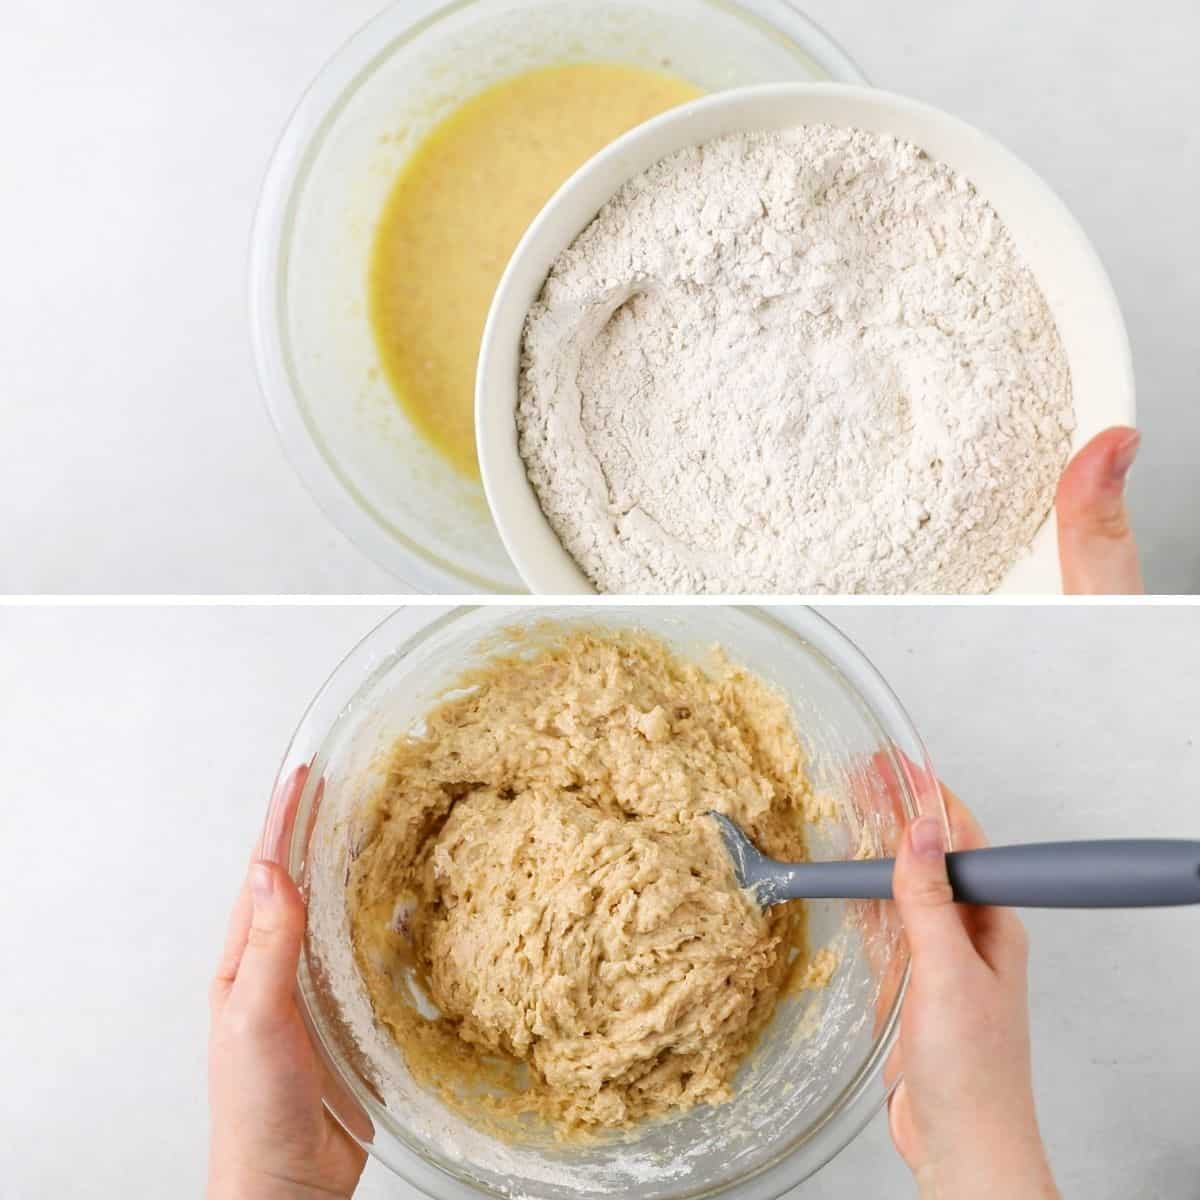 Process photos of adding dry ingredients to wet ones to nake muffin batter.